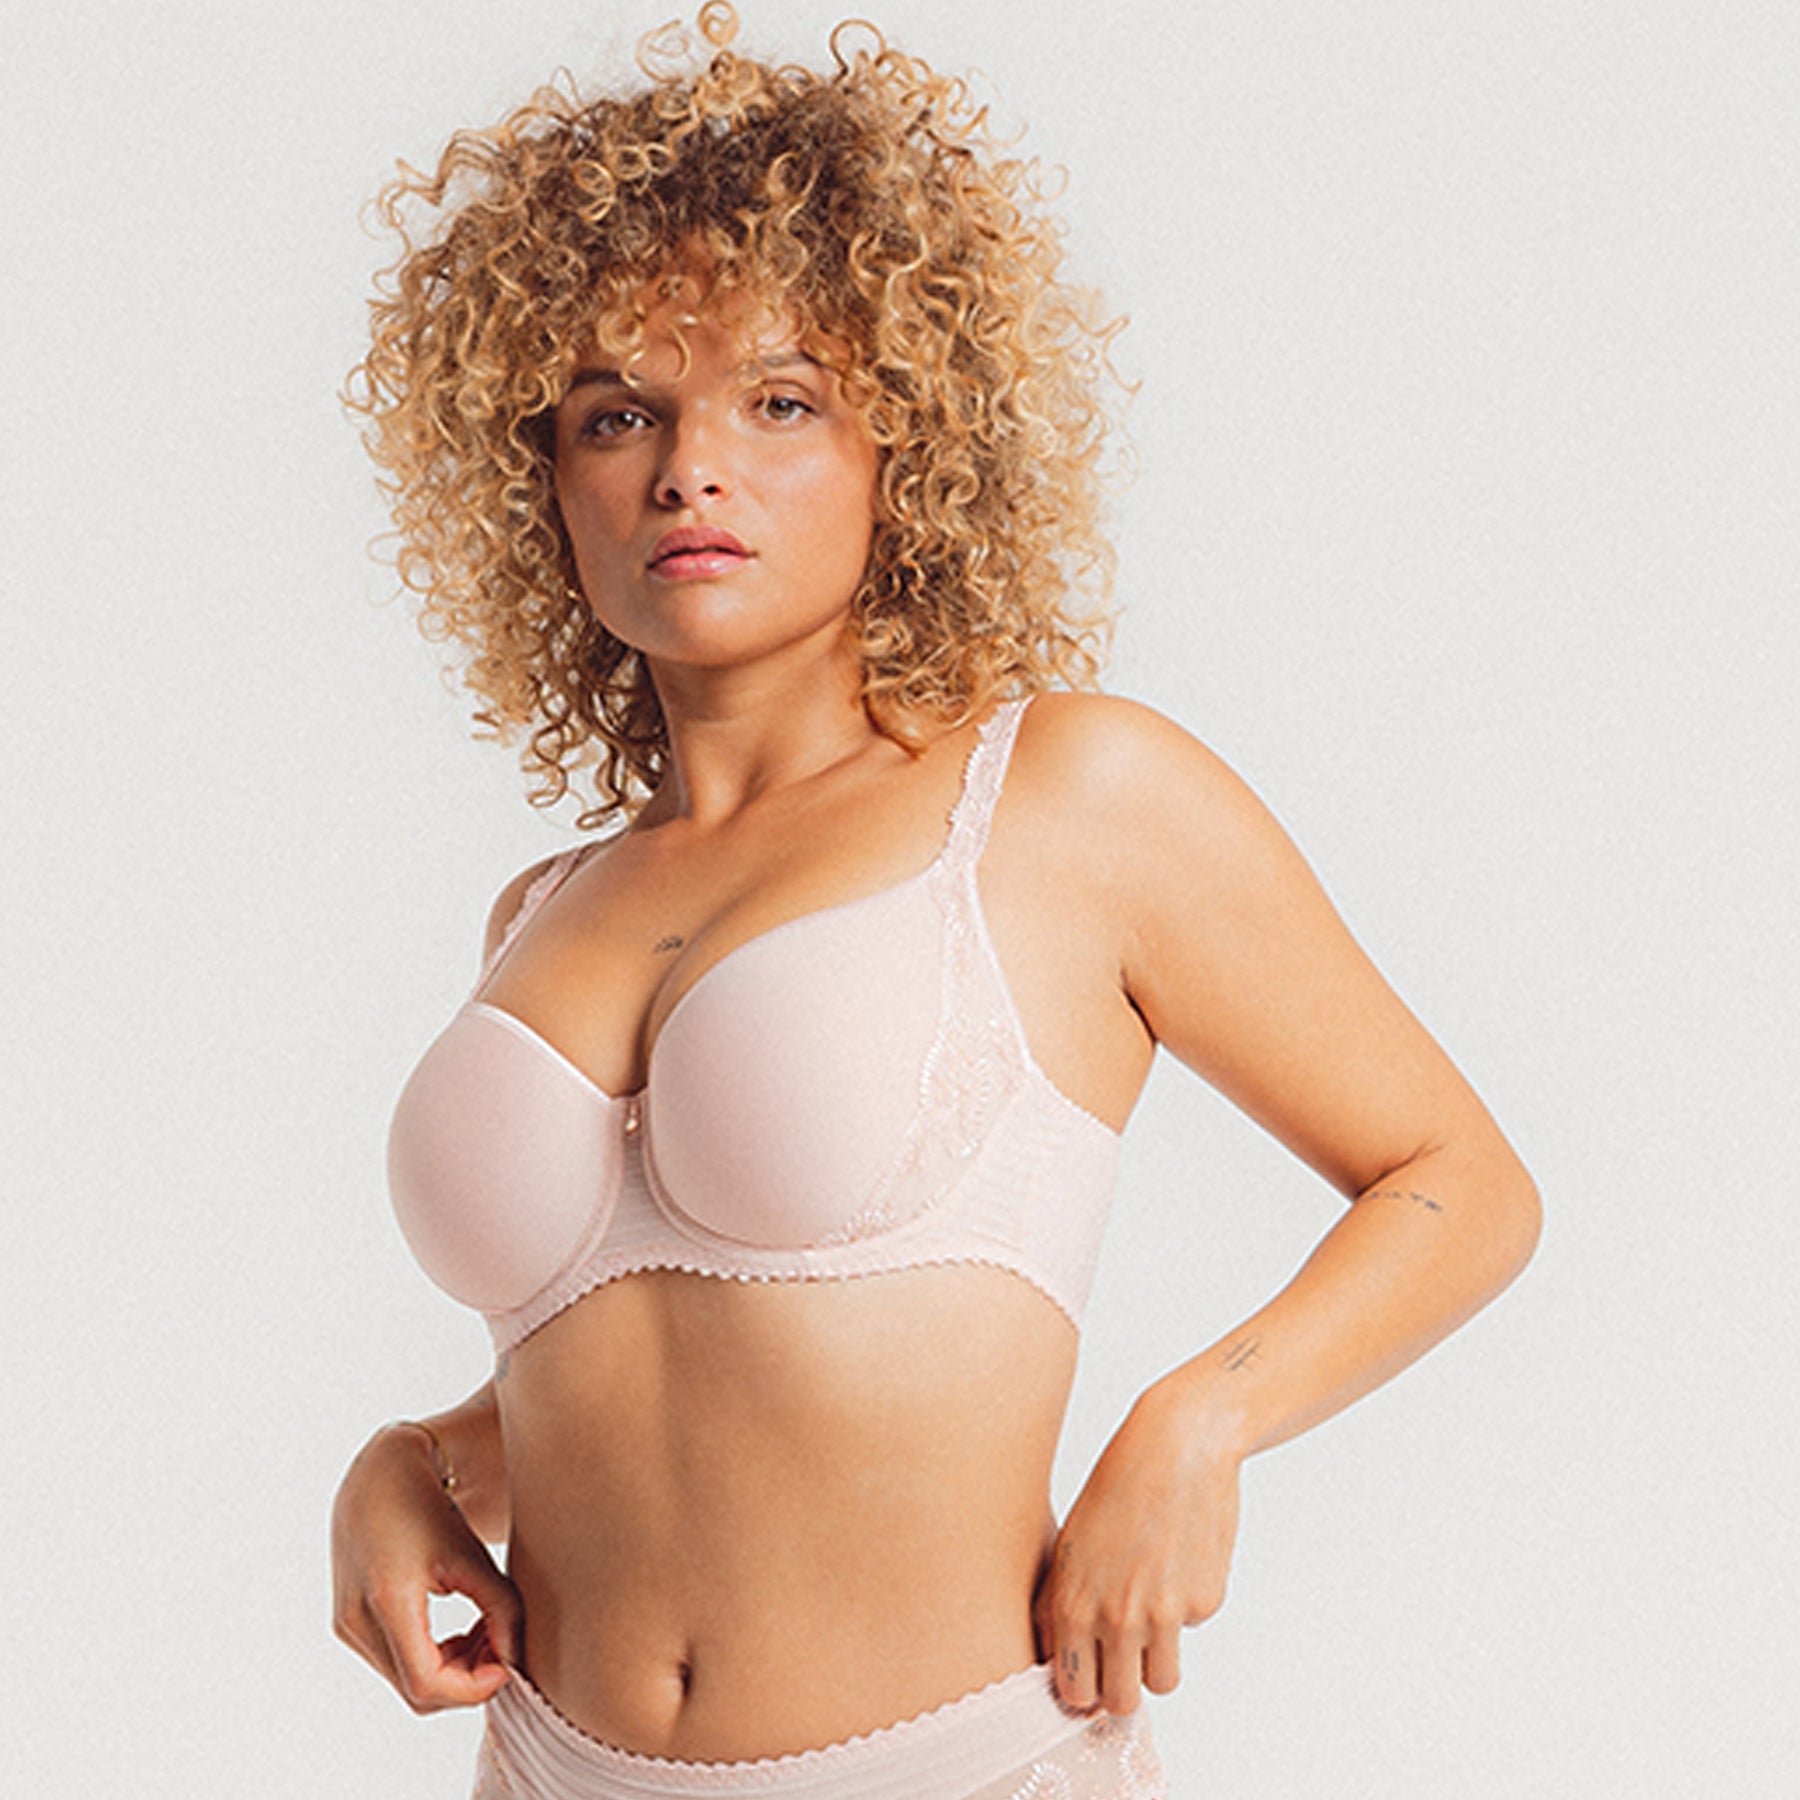 Designer Balcony Bras: Shop Our Hand-Picked Collection